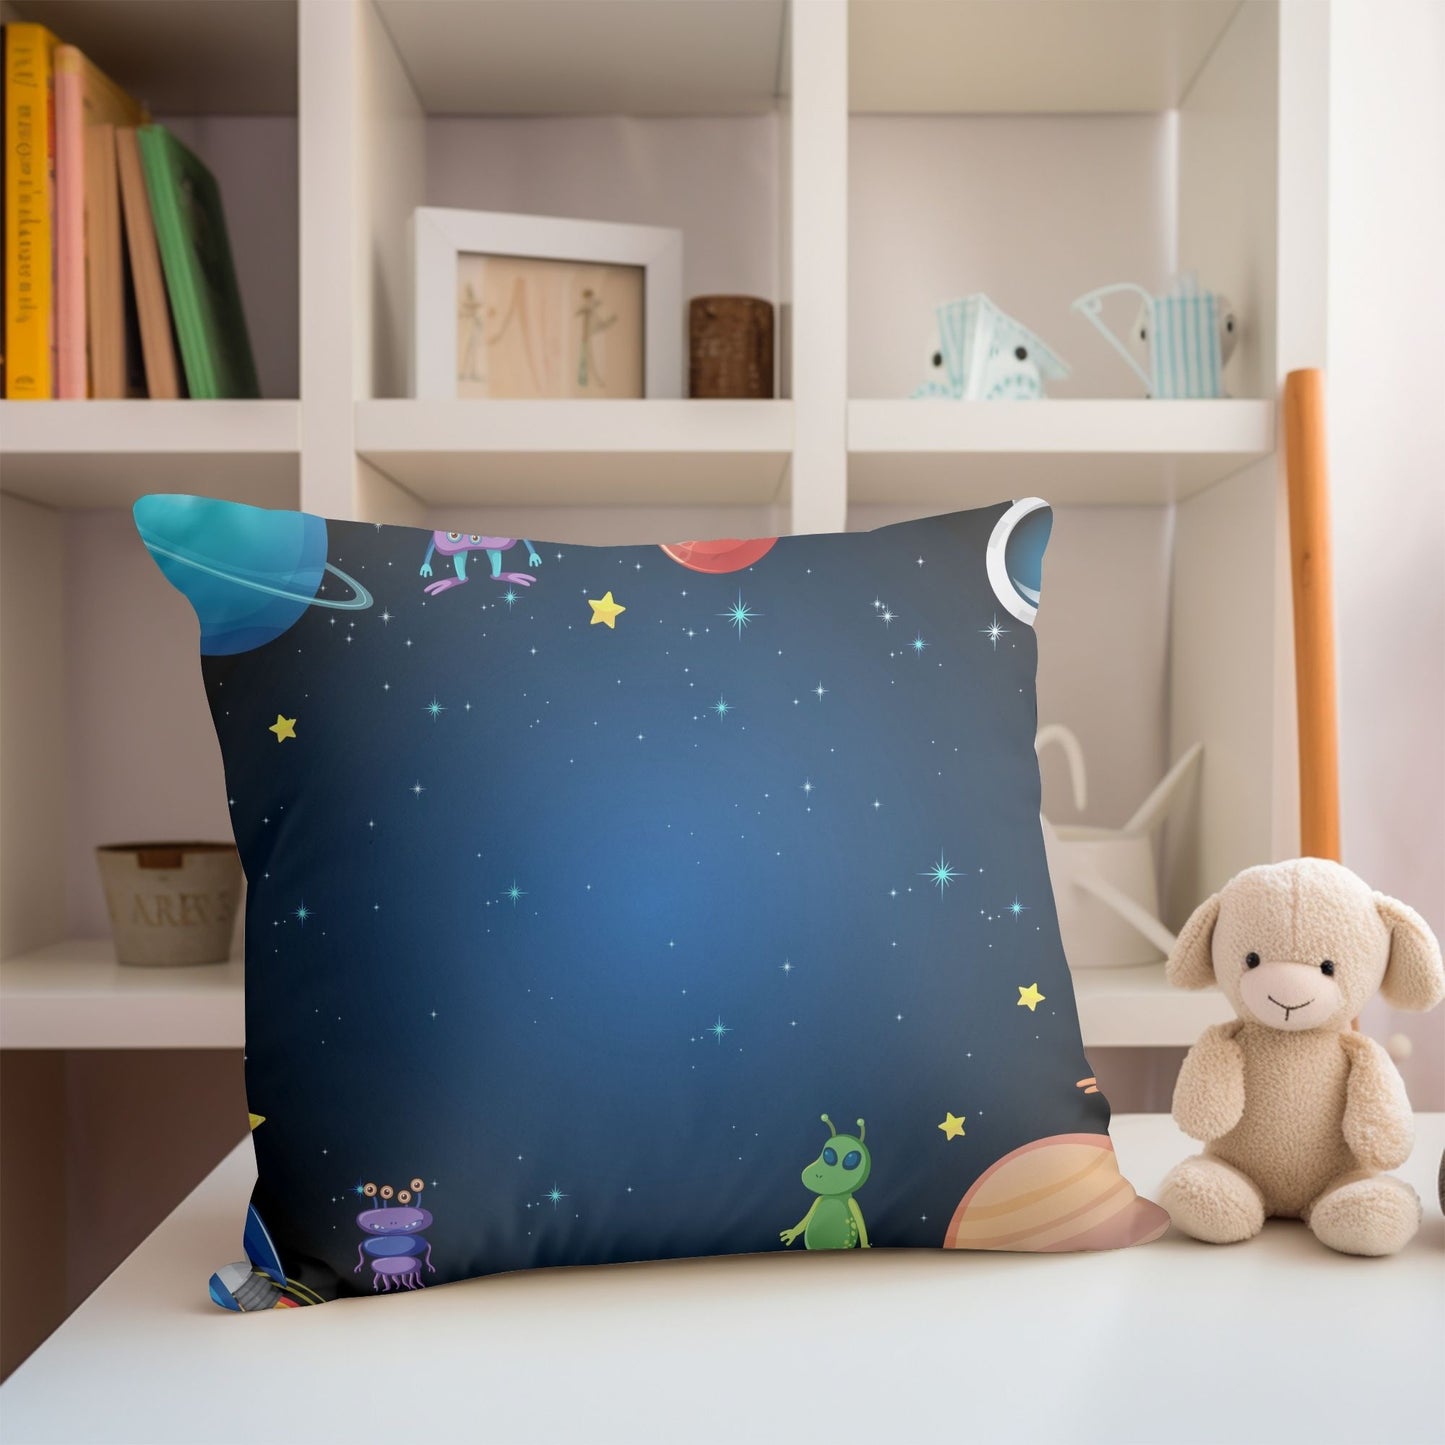 Fun-filled pillow featuring playful aliens for kids' spaces.